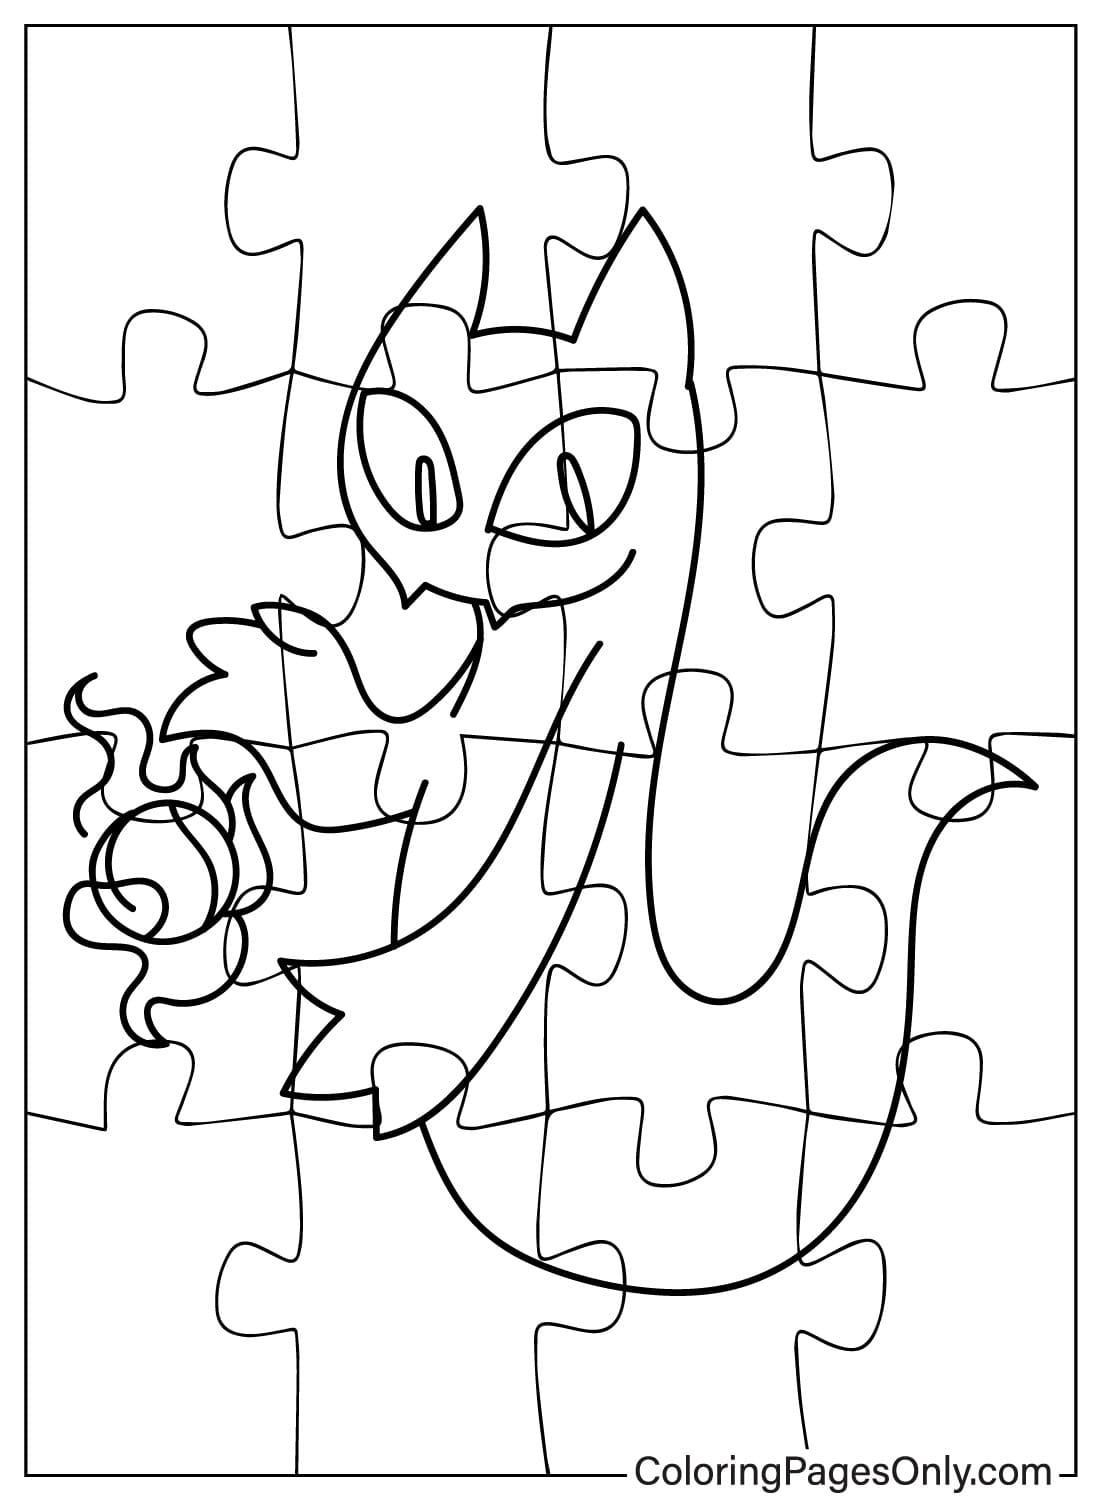 Ghazt Coloring Page Free from Ghazt